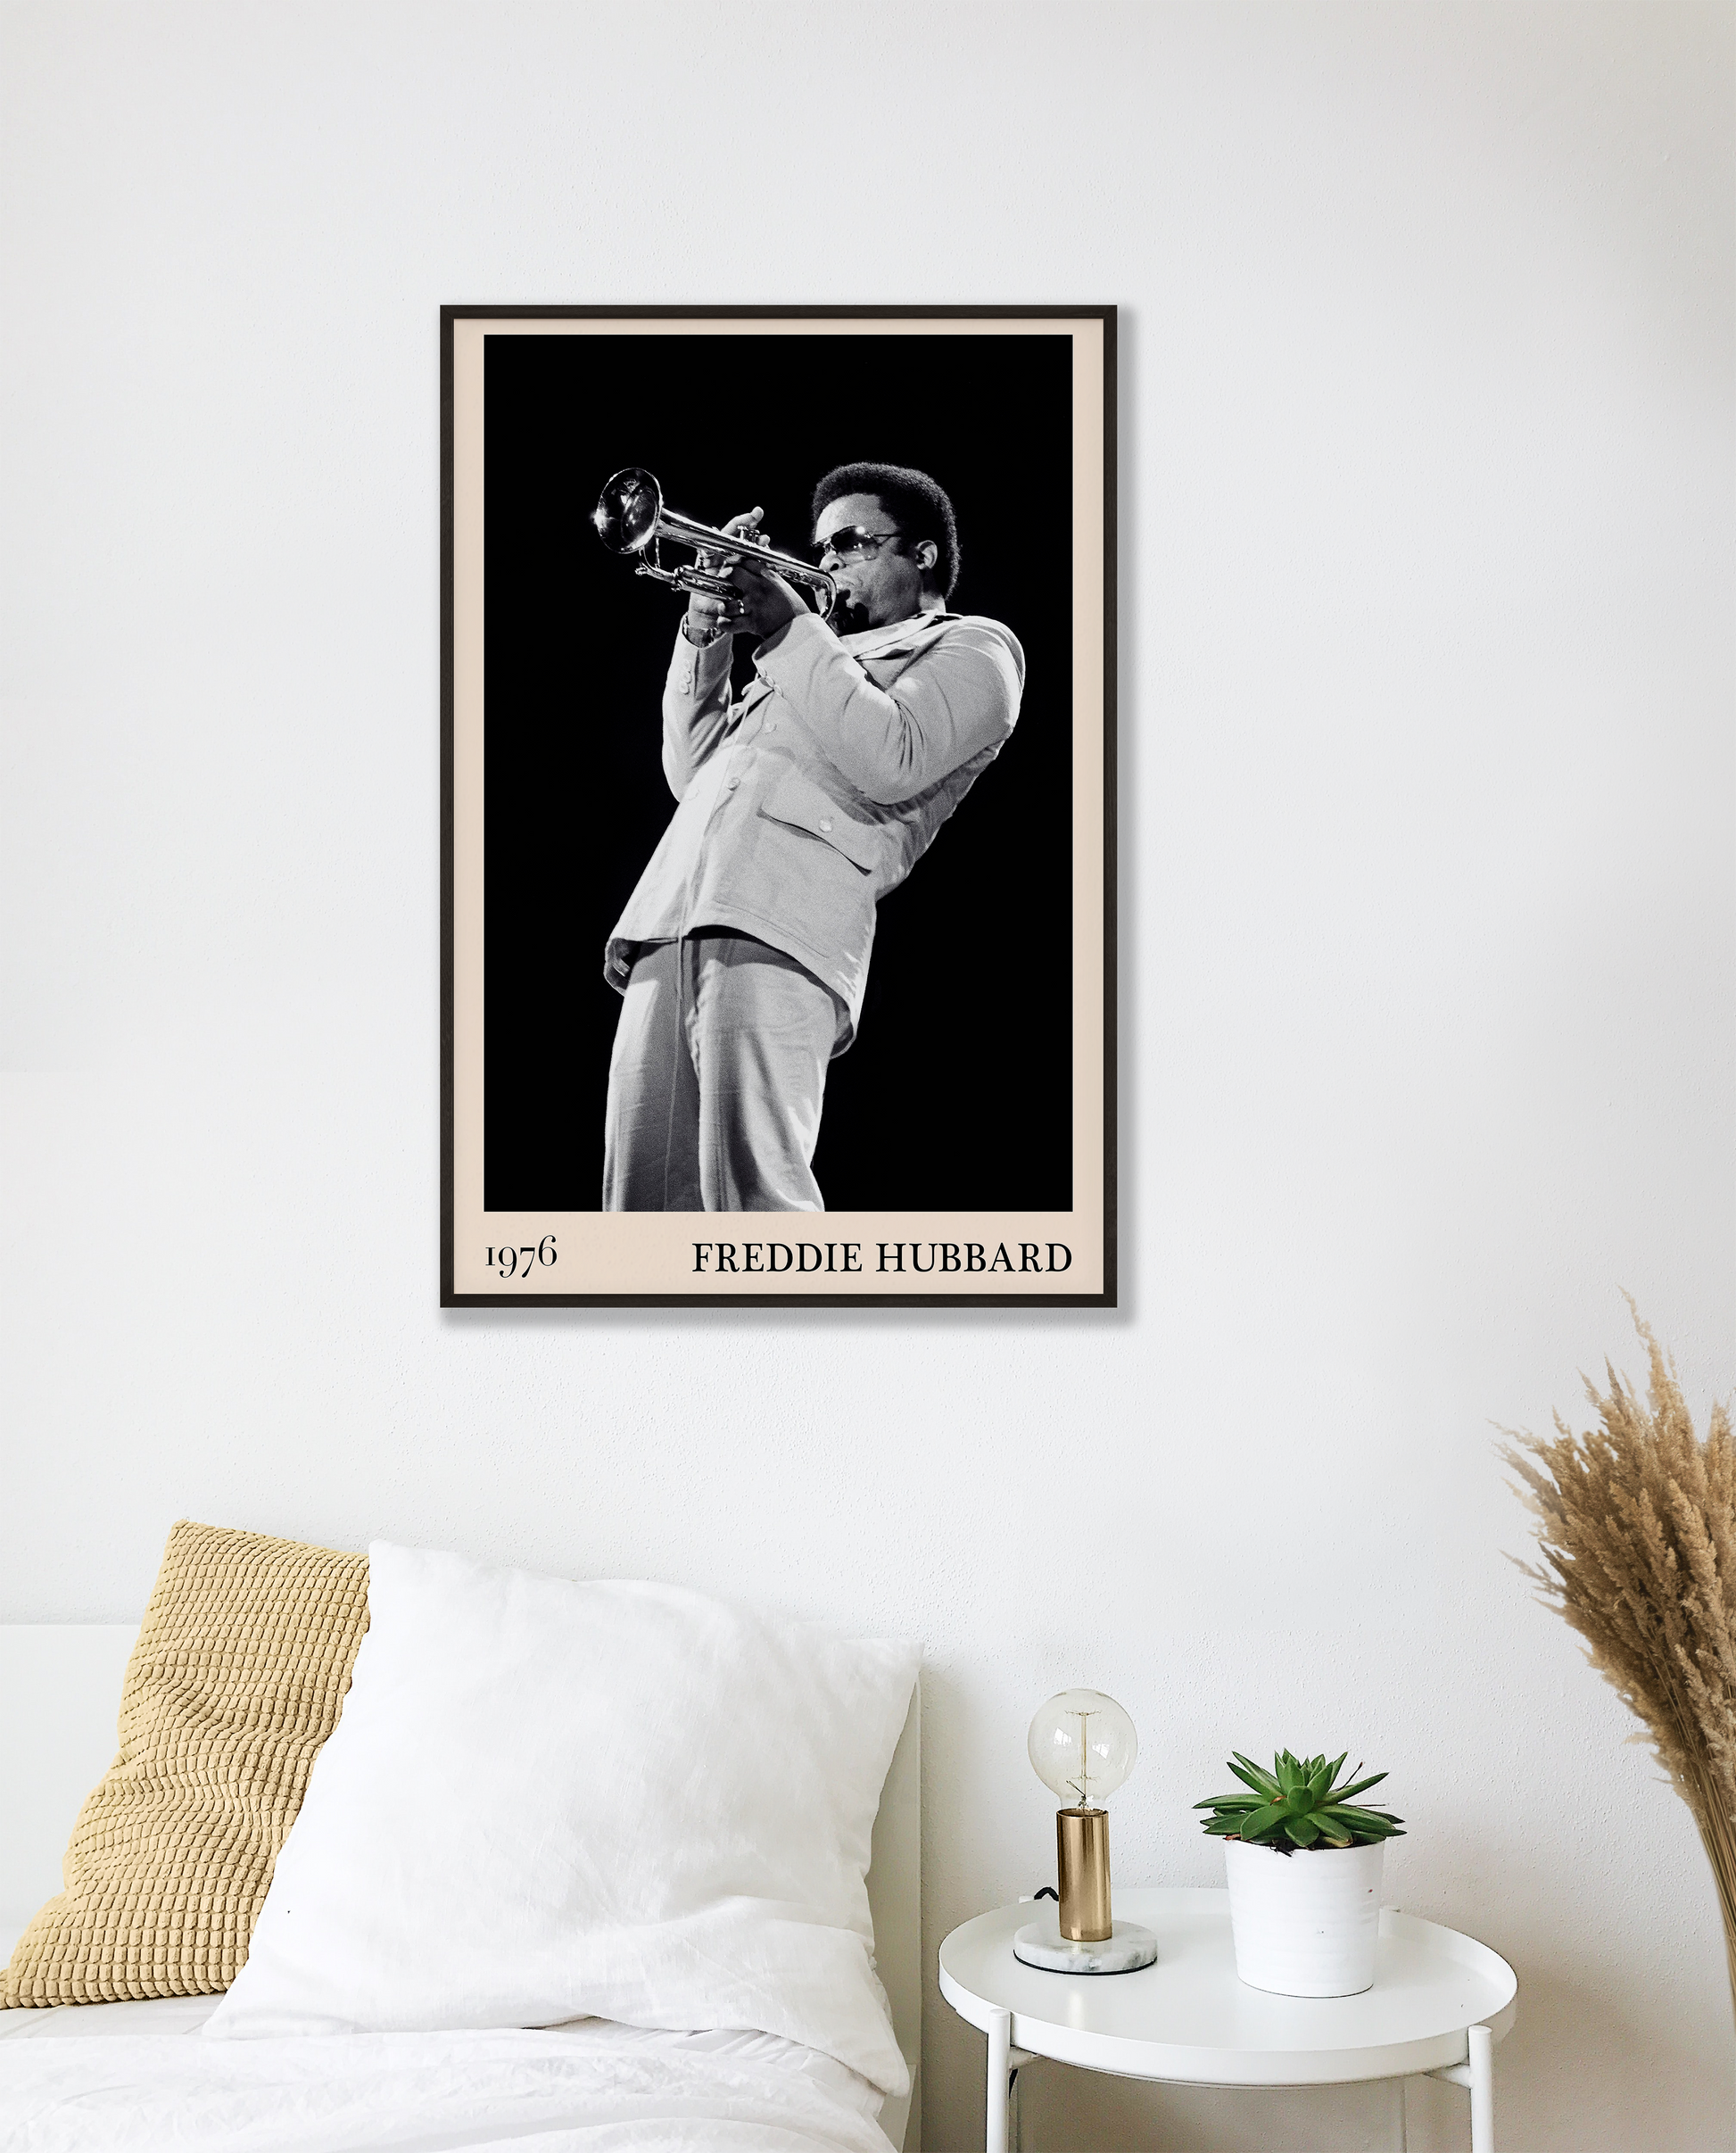 1976 photograph of Freddie Hubbard taken by Thomas Marcello. Picture crafted into a cool black framed jazz print, with an off-white border. Poster is hanging on a off-white bedroom wall.